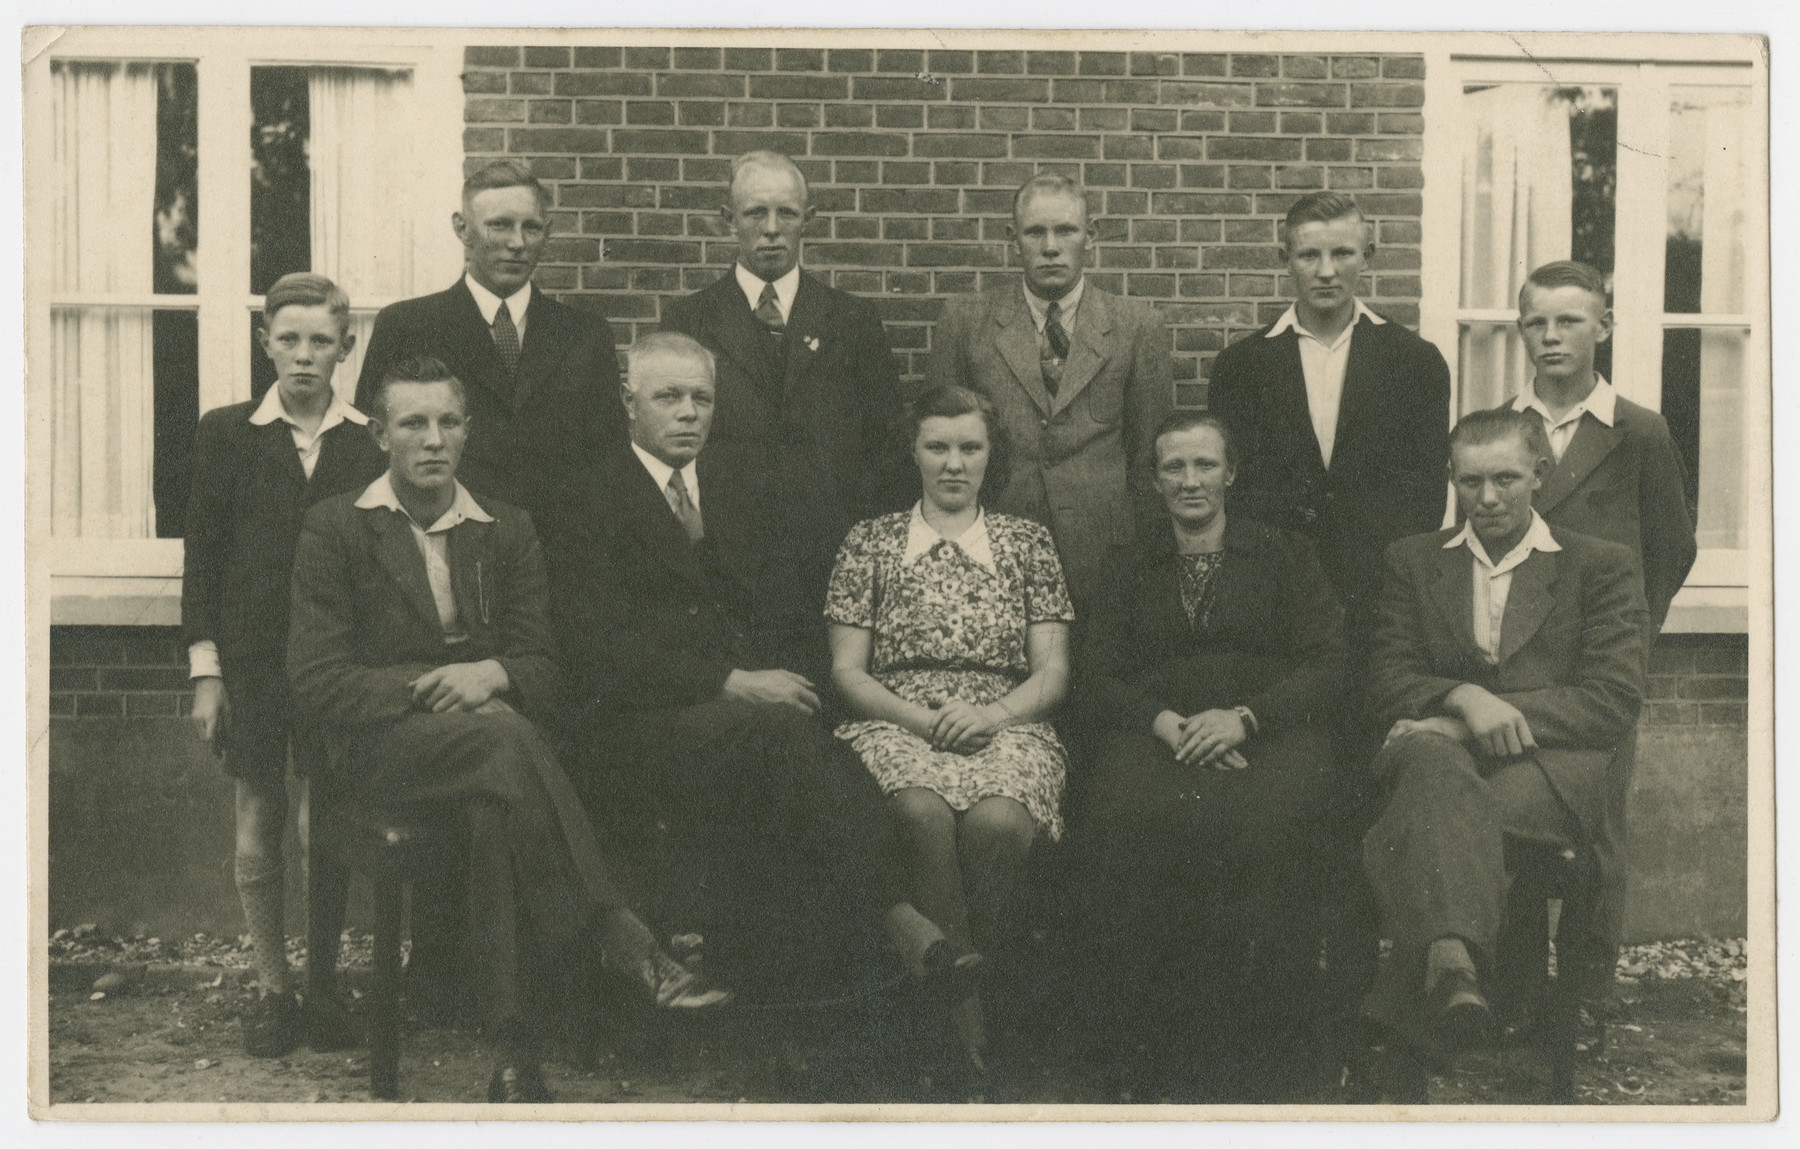 Portrait of the Korten family that hid Lennie and Yitzchak Jedwab for three months.

The Korten family hid the Jedwabs in their home and asked nothing in return. However when German solder were sent to occupy the Korten family farm the Jedwabs had to be relocated to a new hiding place. 

Standing left to right are Gerhardus Hendrikus Korten, Johan Korten, Hendrik Korten, Jan Willem Korten, Gerrit Korten, and Arend Jan Hendrikus Korten.

Seated, left to right, are Albert Korten, Johannes Bernardus Korten, Anna Korten, Johanna Geertruida Korten, and Bernard Korten.